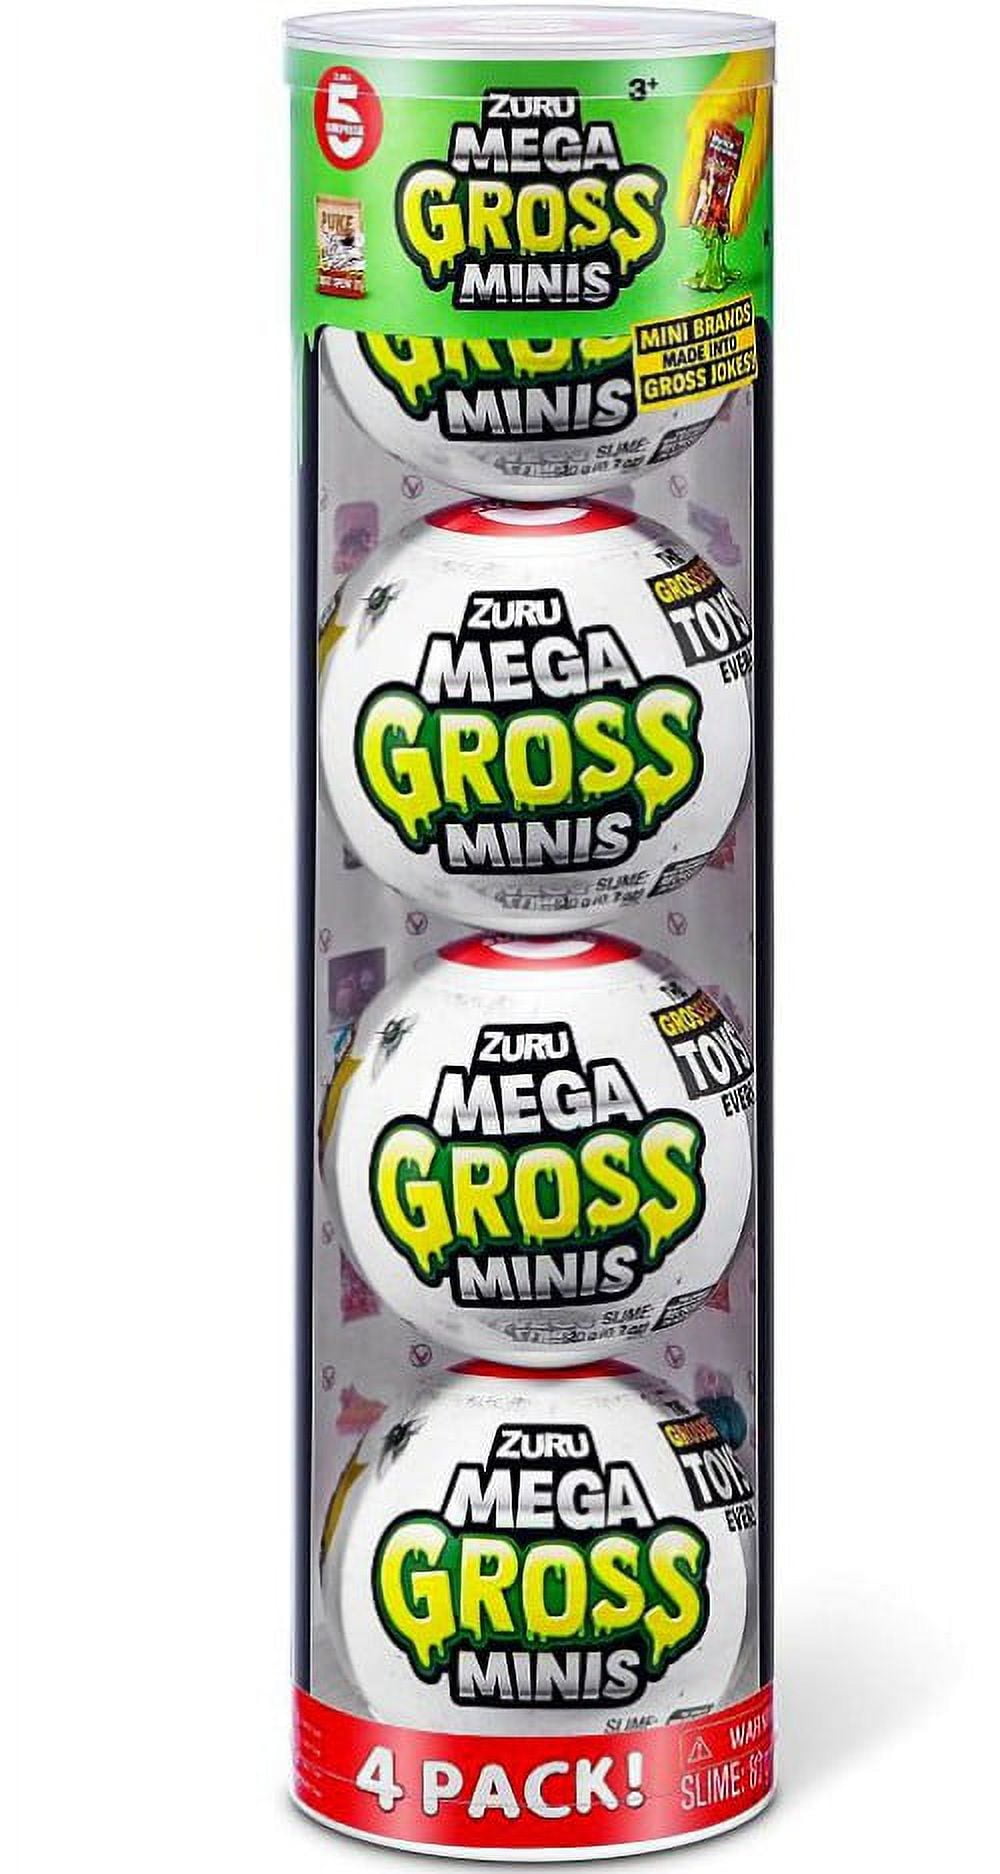 The Mega Gross Minis - Opening And Reviewing 